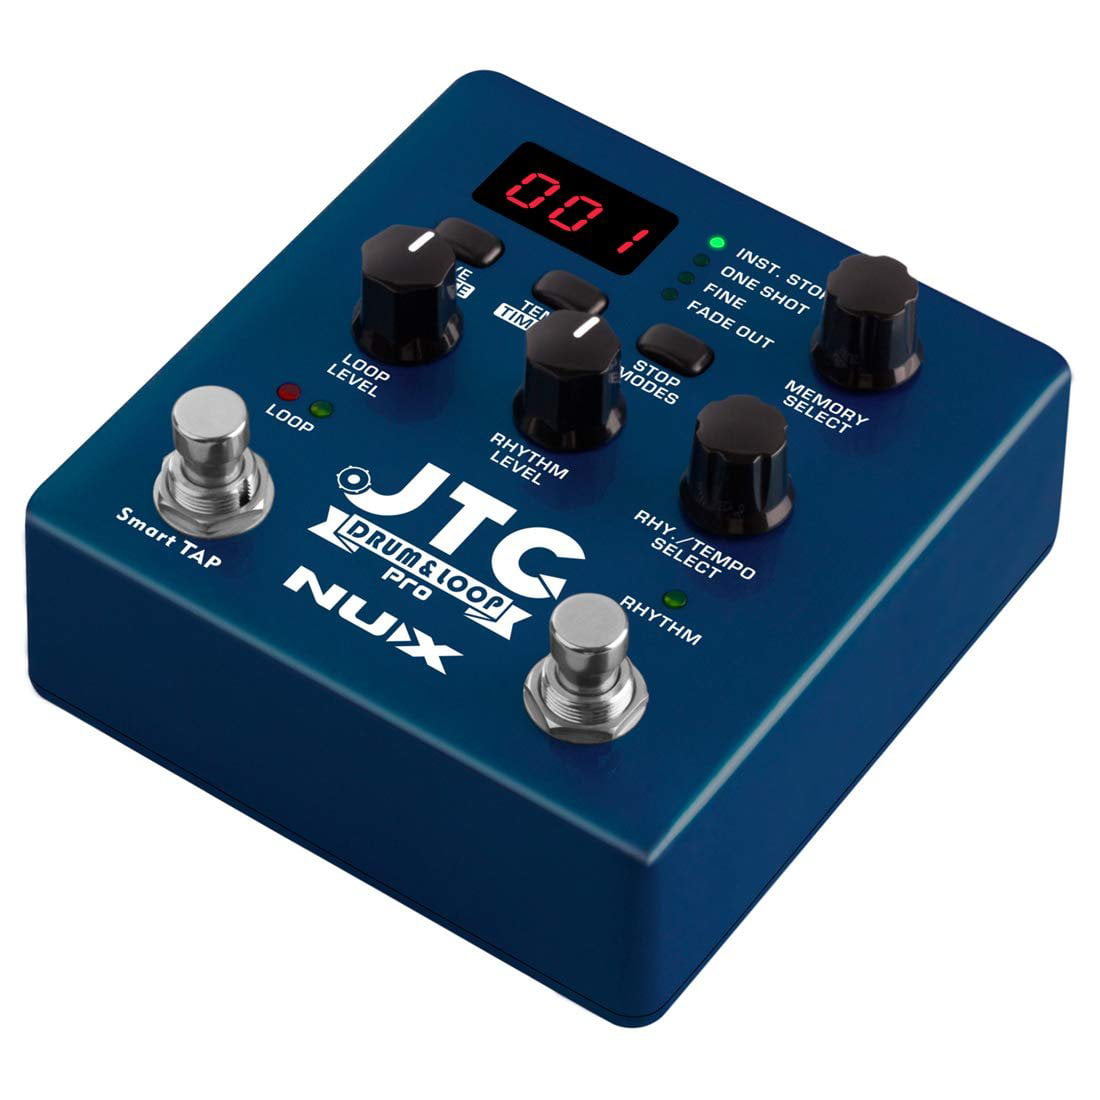 NUX JTC PRO Drum Loop PRO Dual Switch Looper Pedal 6 hours recording time  24-bit and 44.1 kHz sample rate